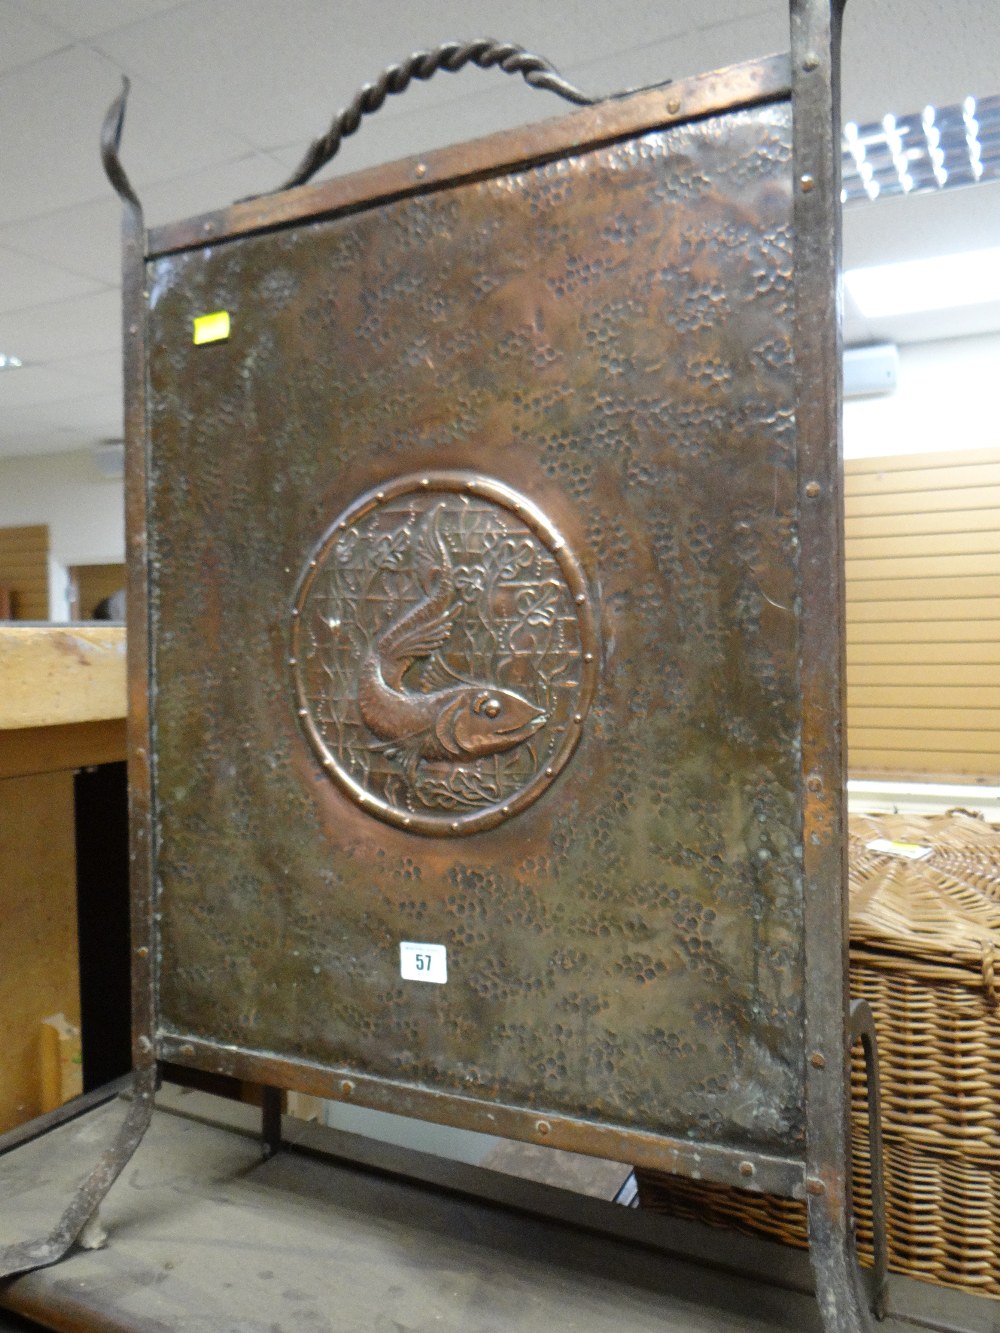 An Arts & Crafts-style beaten copper fire screen with fish cameo